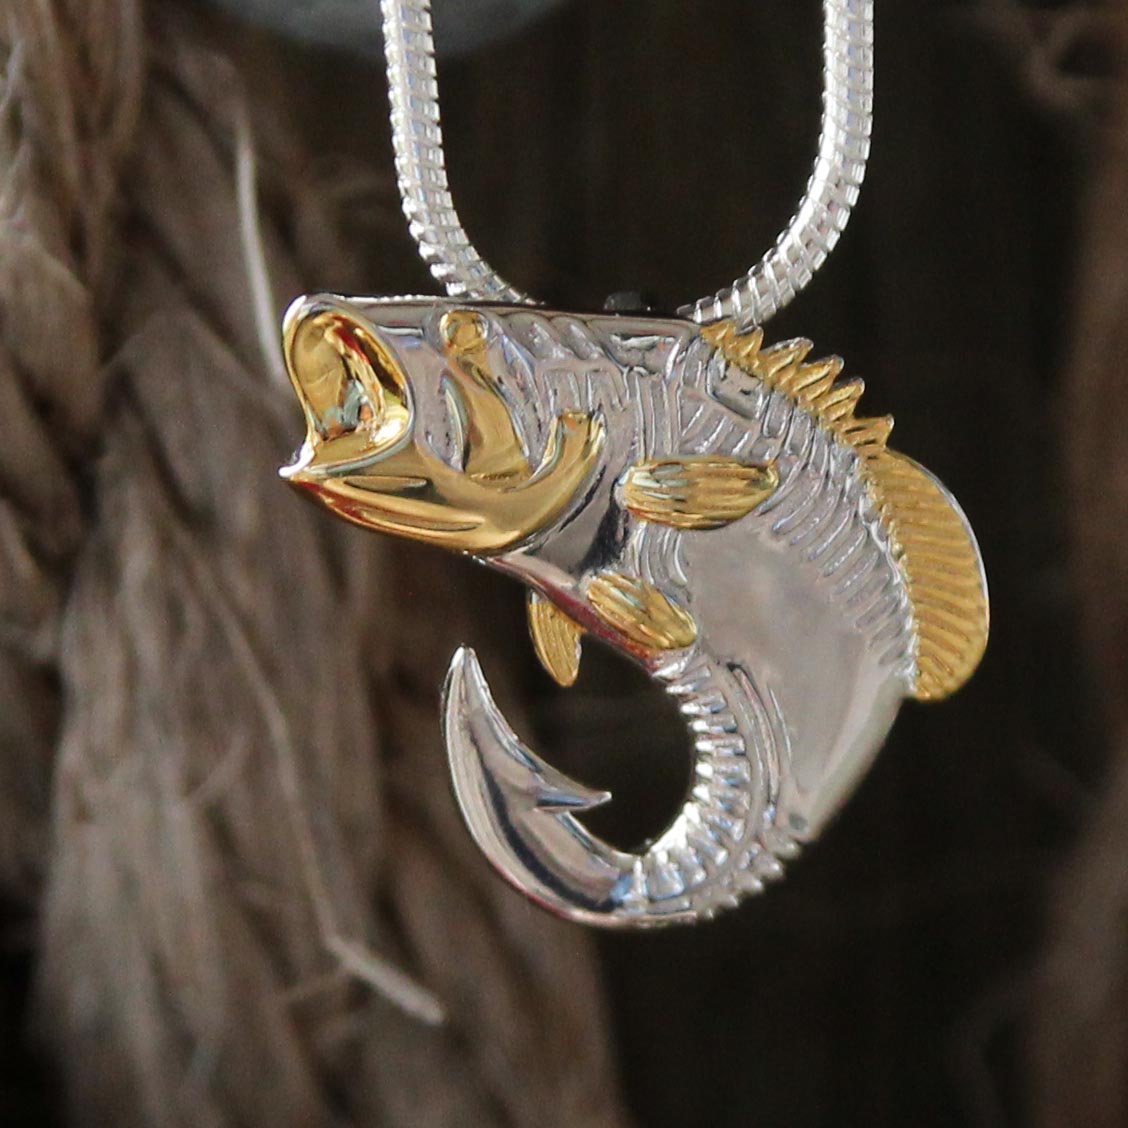 Largemouth Bass Pendant in Solid Gold, One-sided